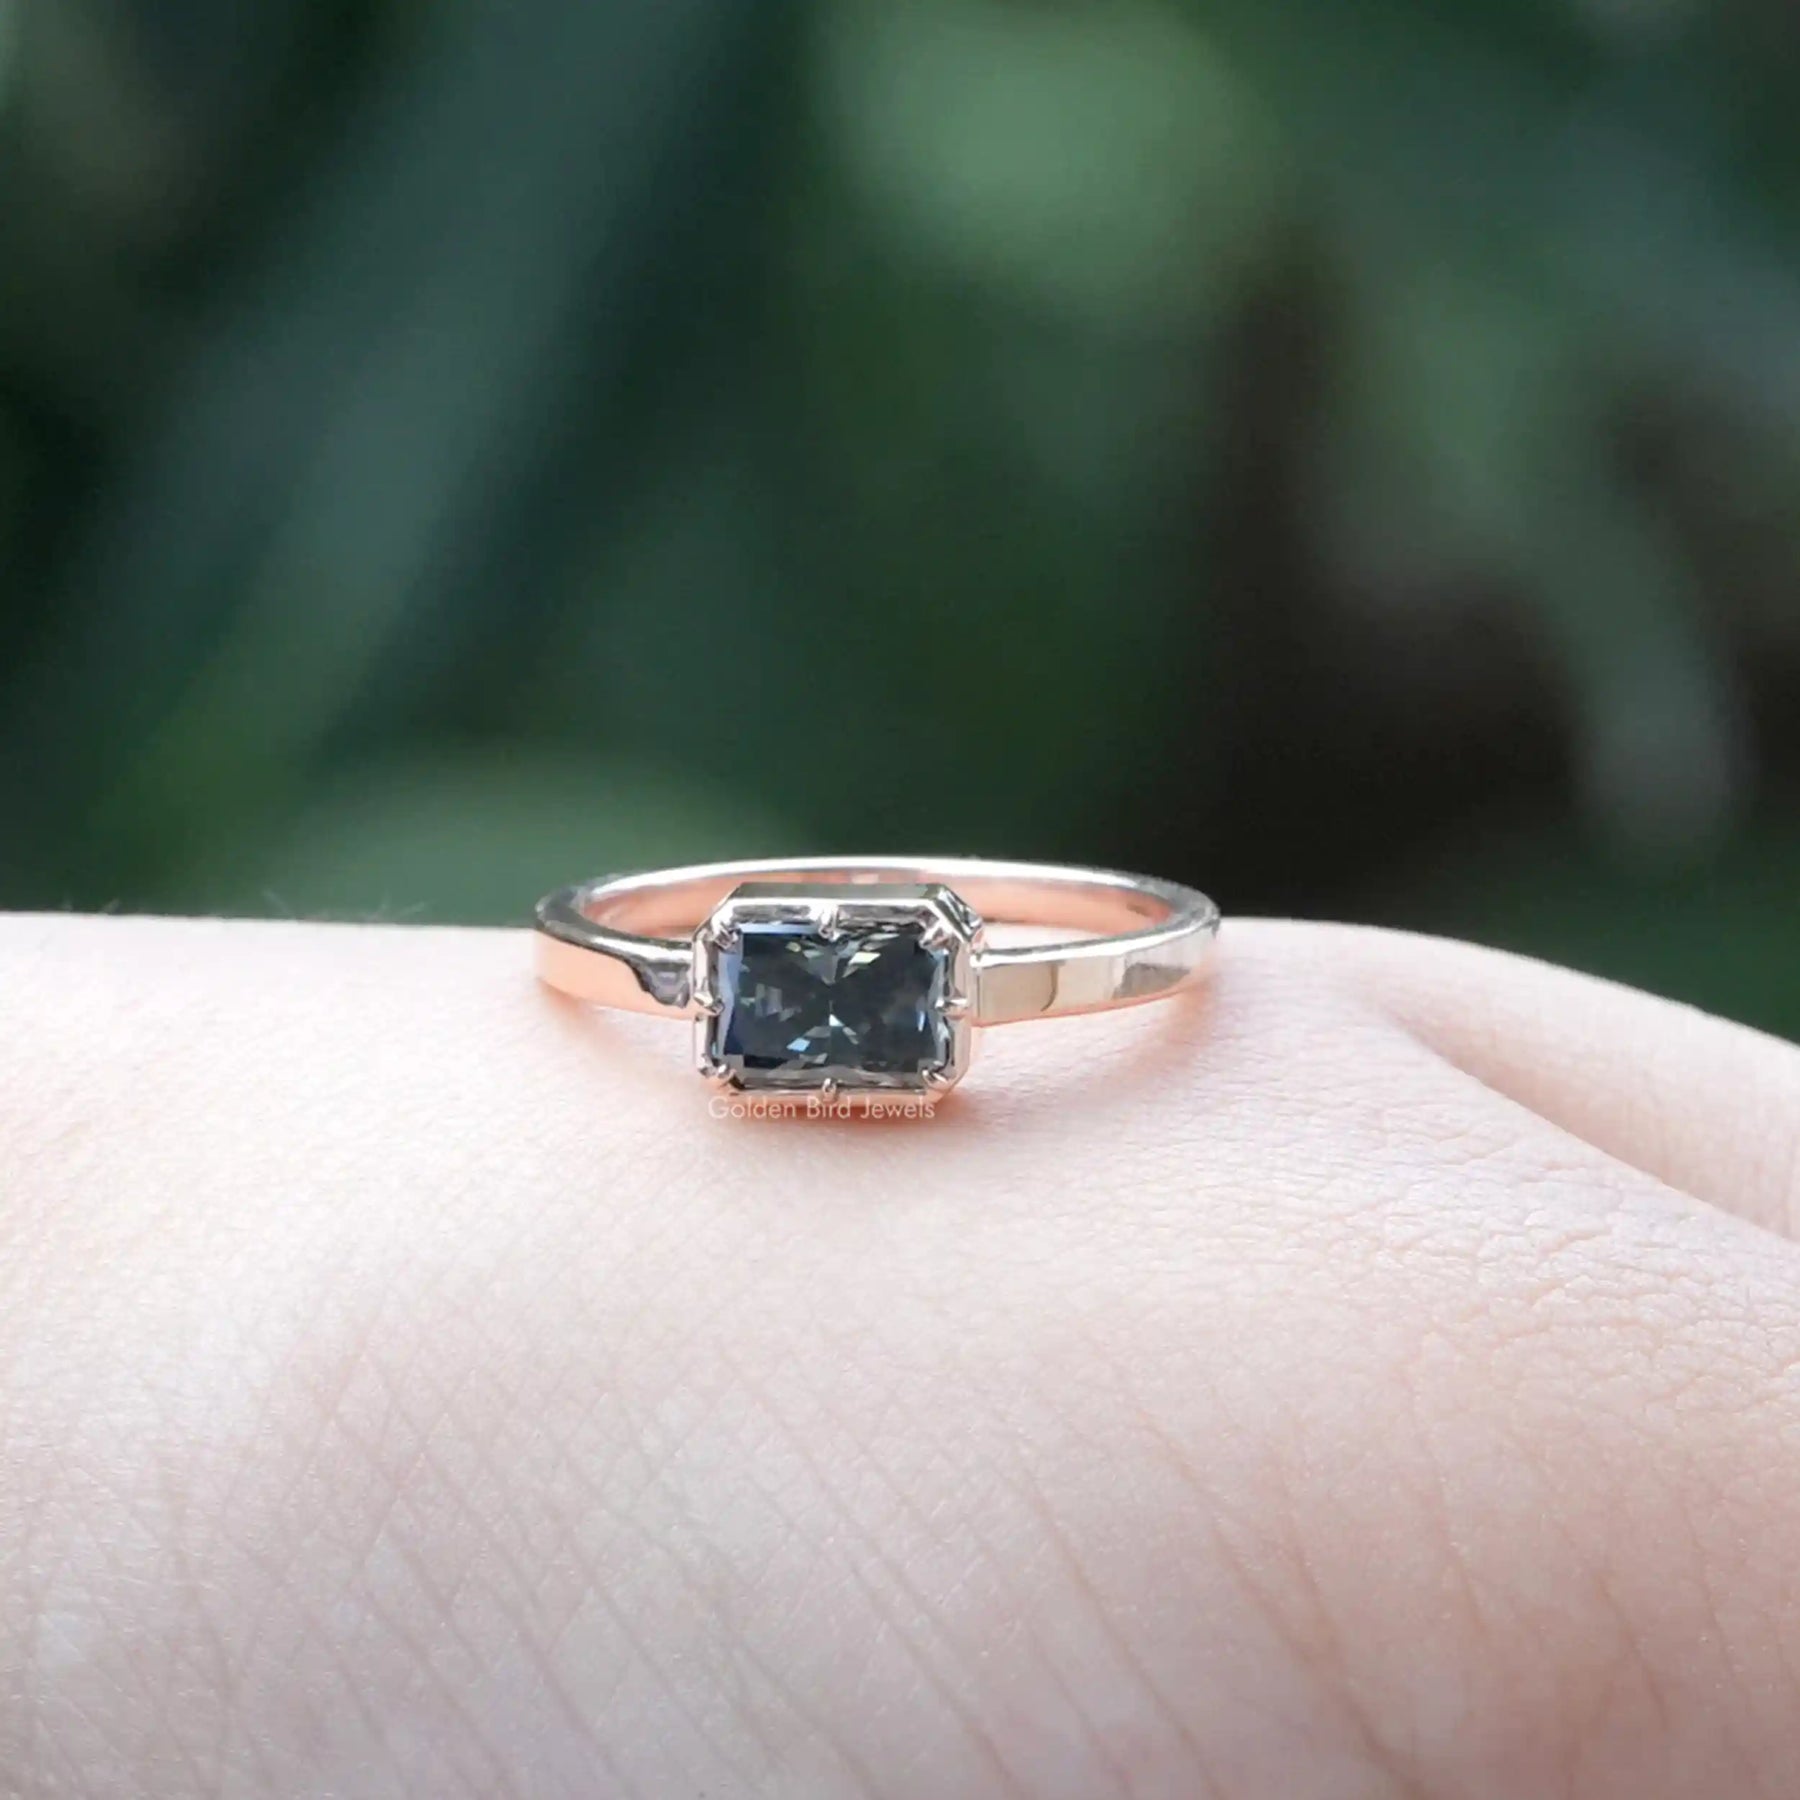 [This radiant cut solitaire ring made of dark grey color]-[Golden Bird Jewels]